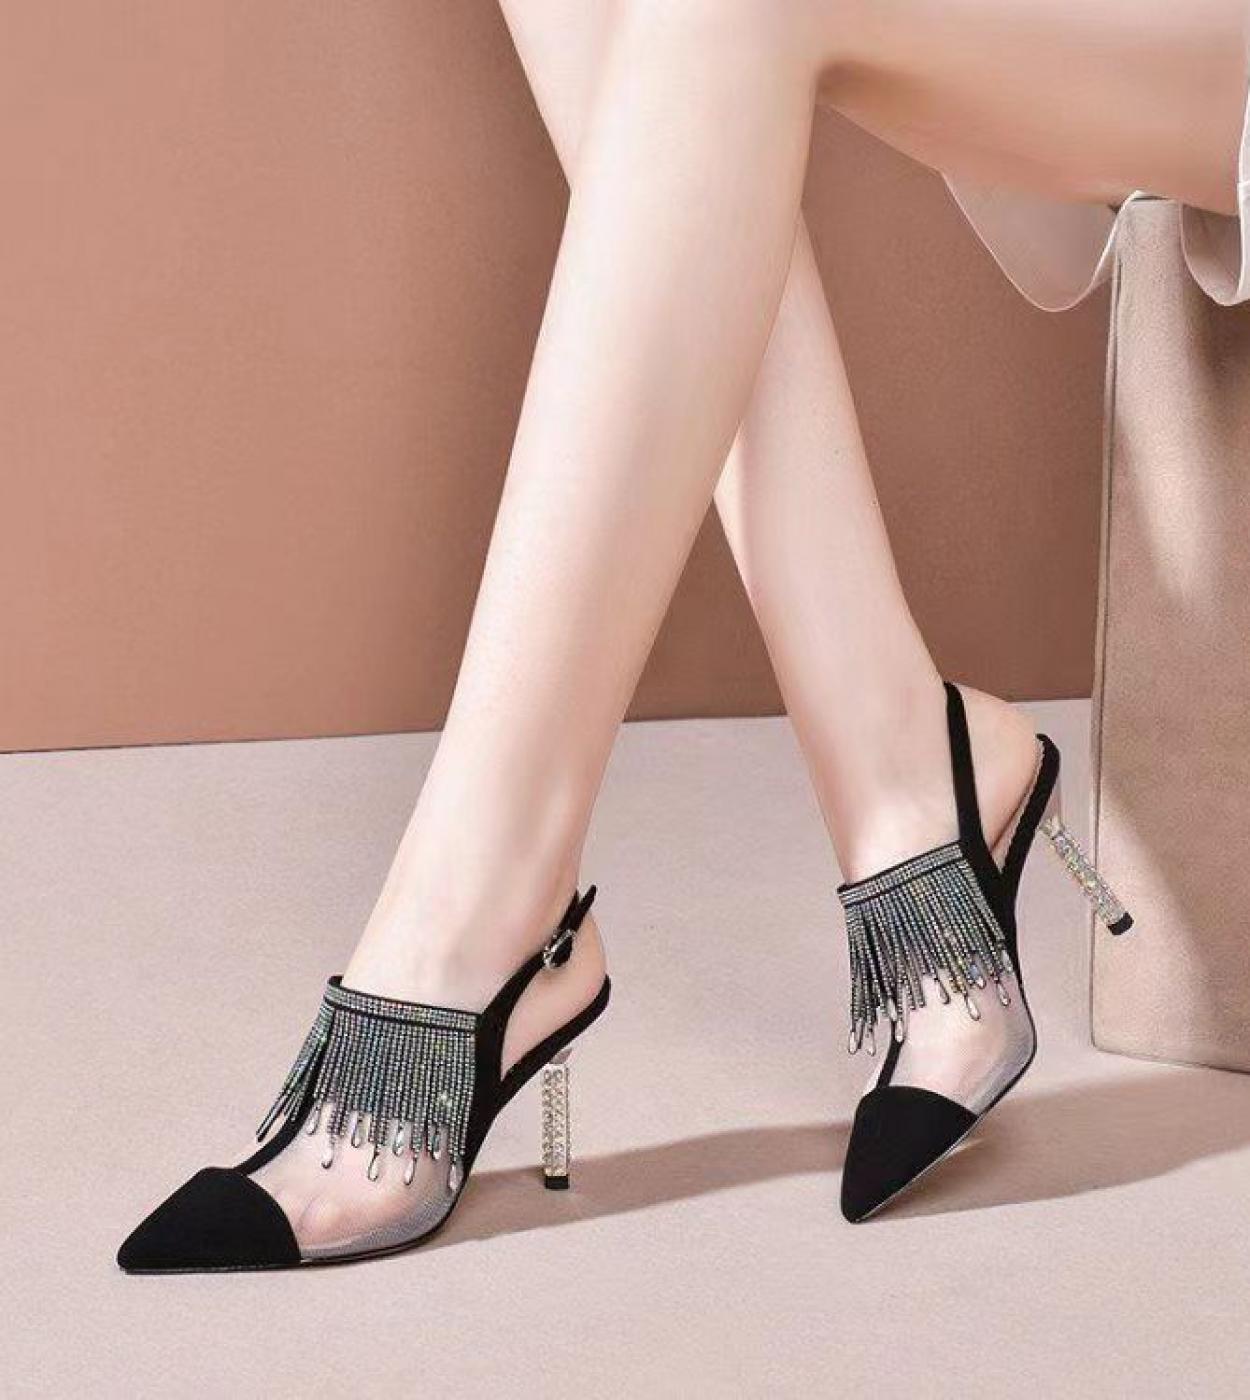 2022 Summer Ladies Pointed Rhinestone Sandal Women Shoes High Heels Sandals Woman Strap  Black Red Wedding Party Shoes L